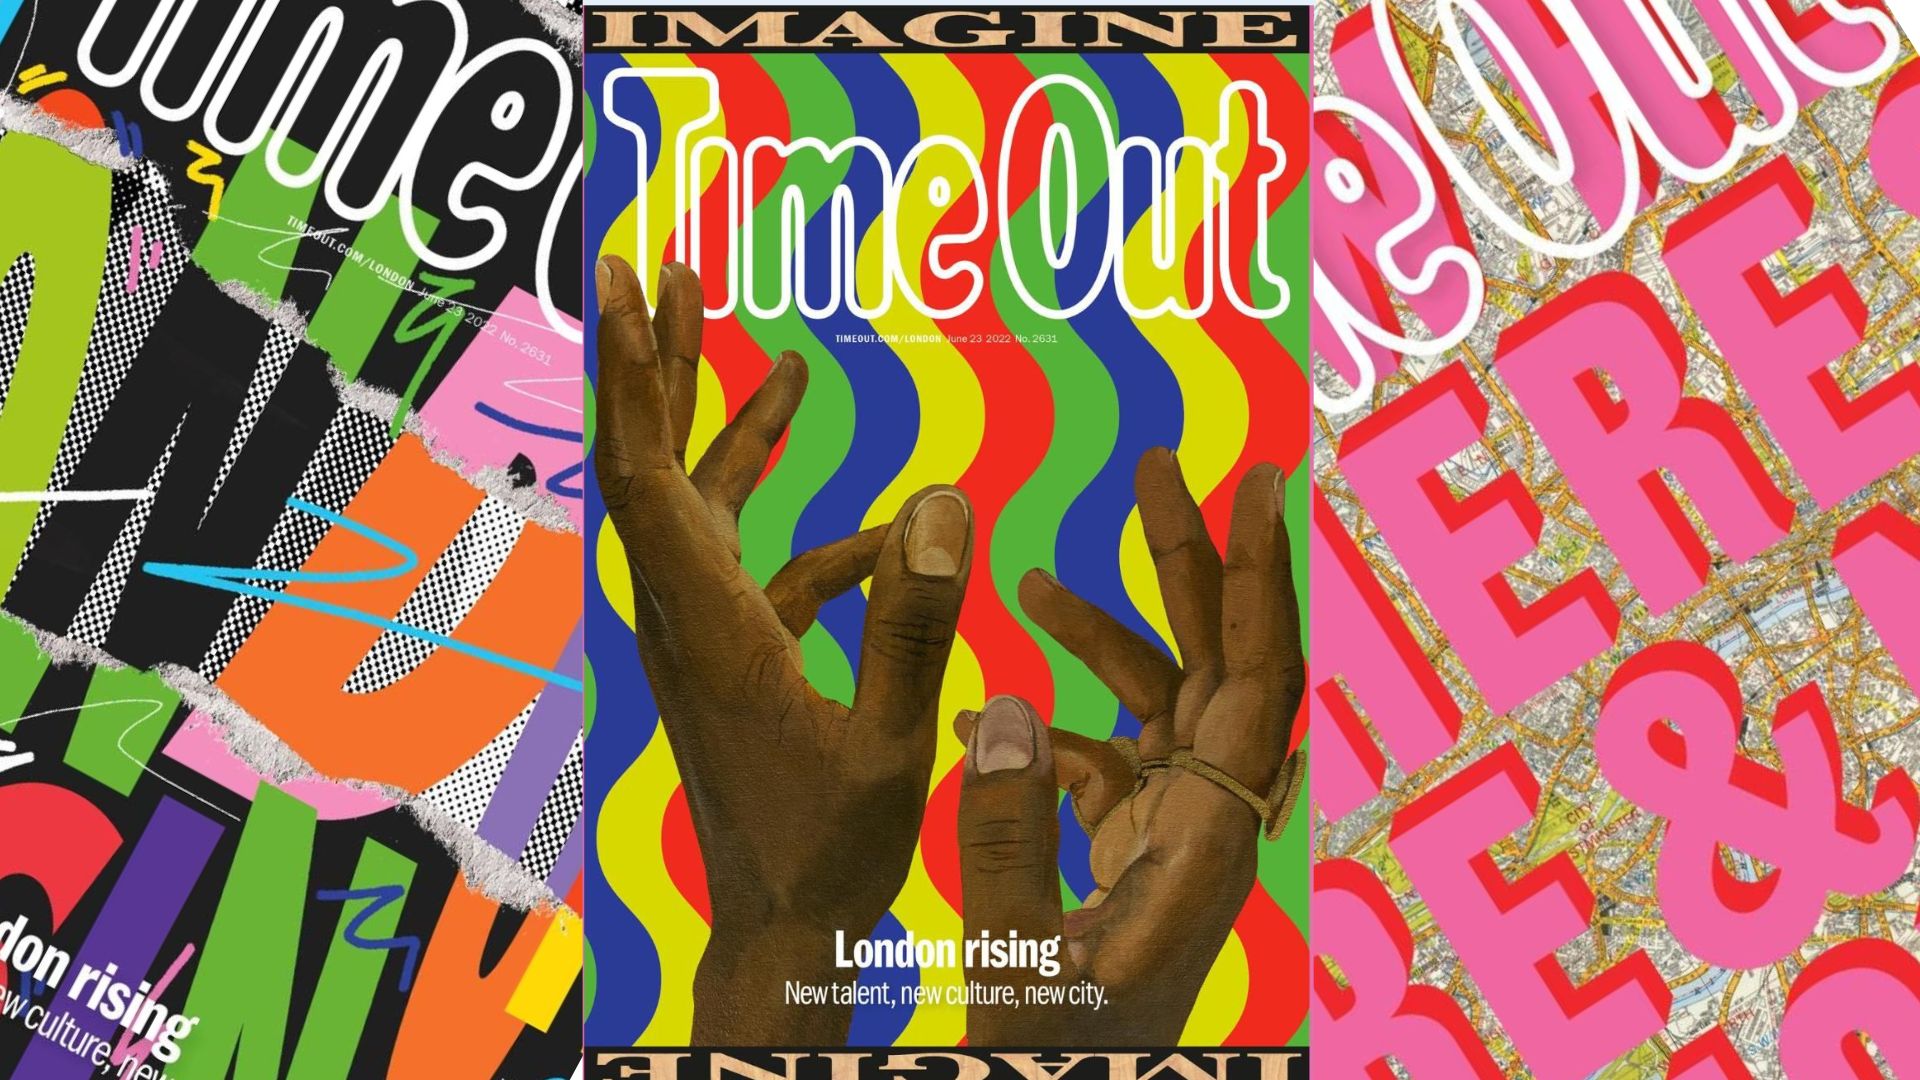 Londoners - pick up Time Out's final print issue today!